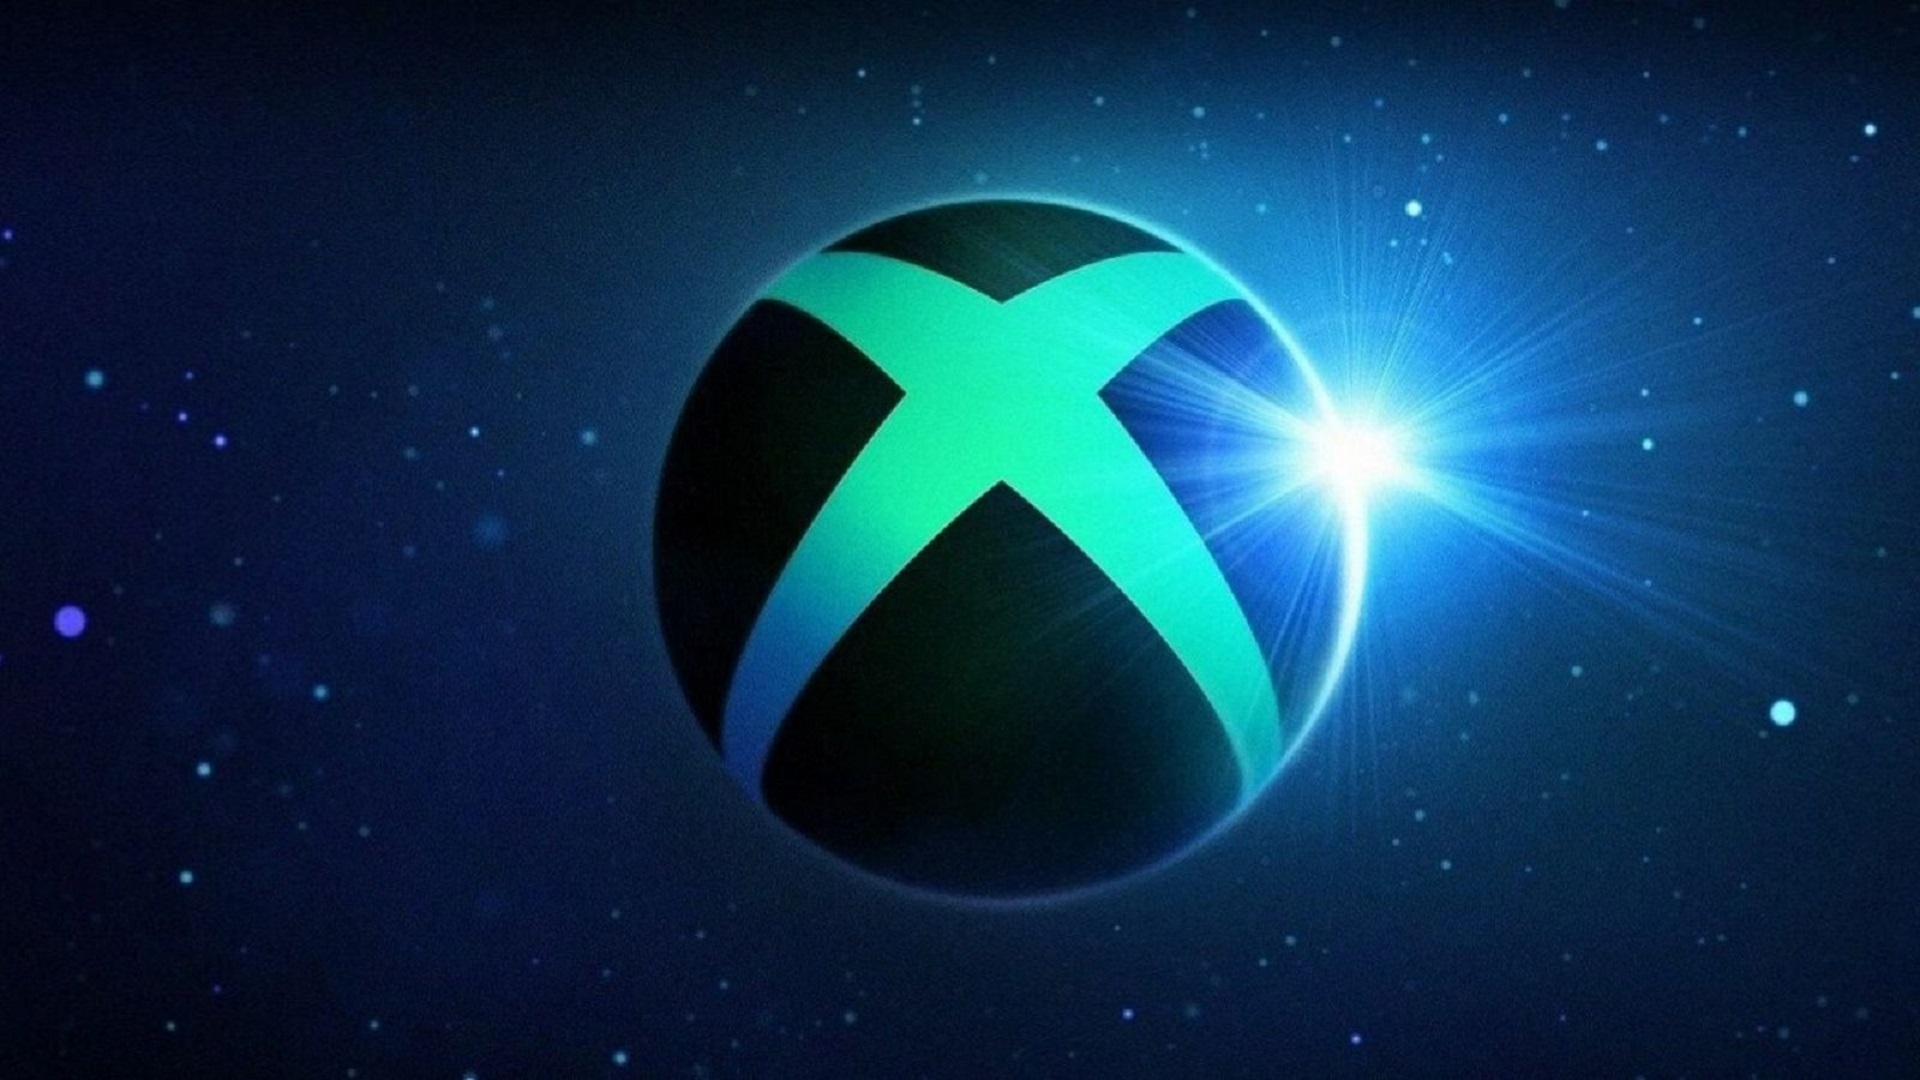 Xbox Cloud Gaming is seeing increased queue times as demand surges